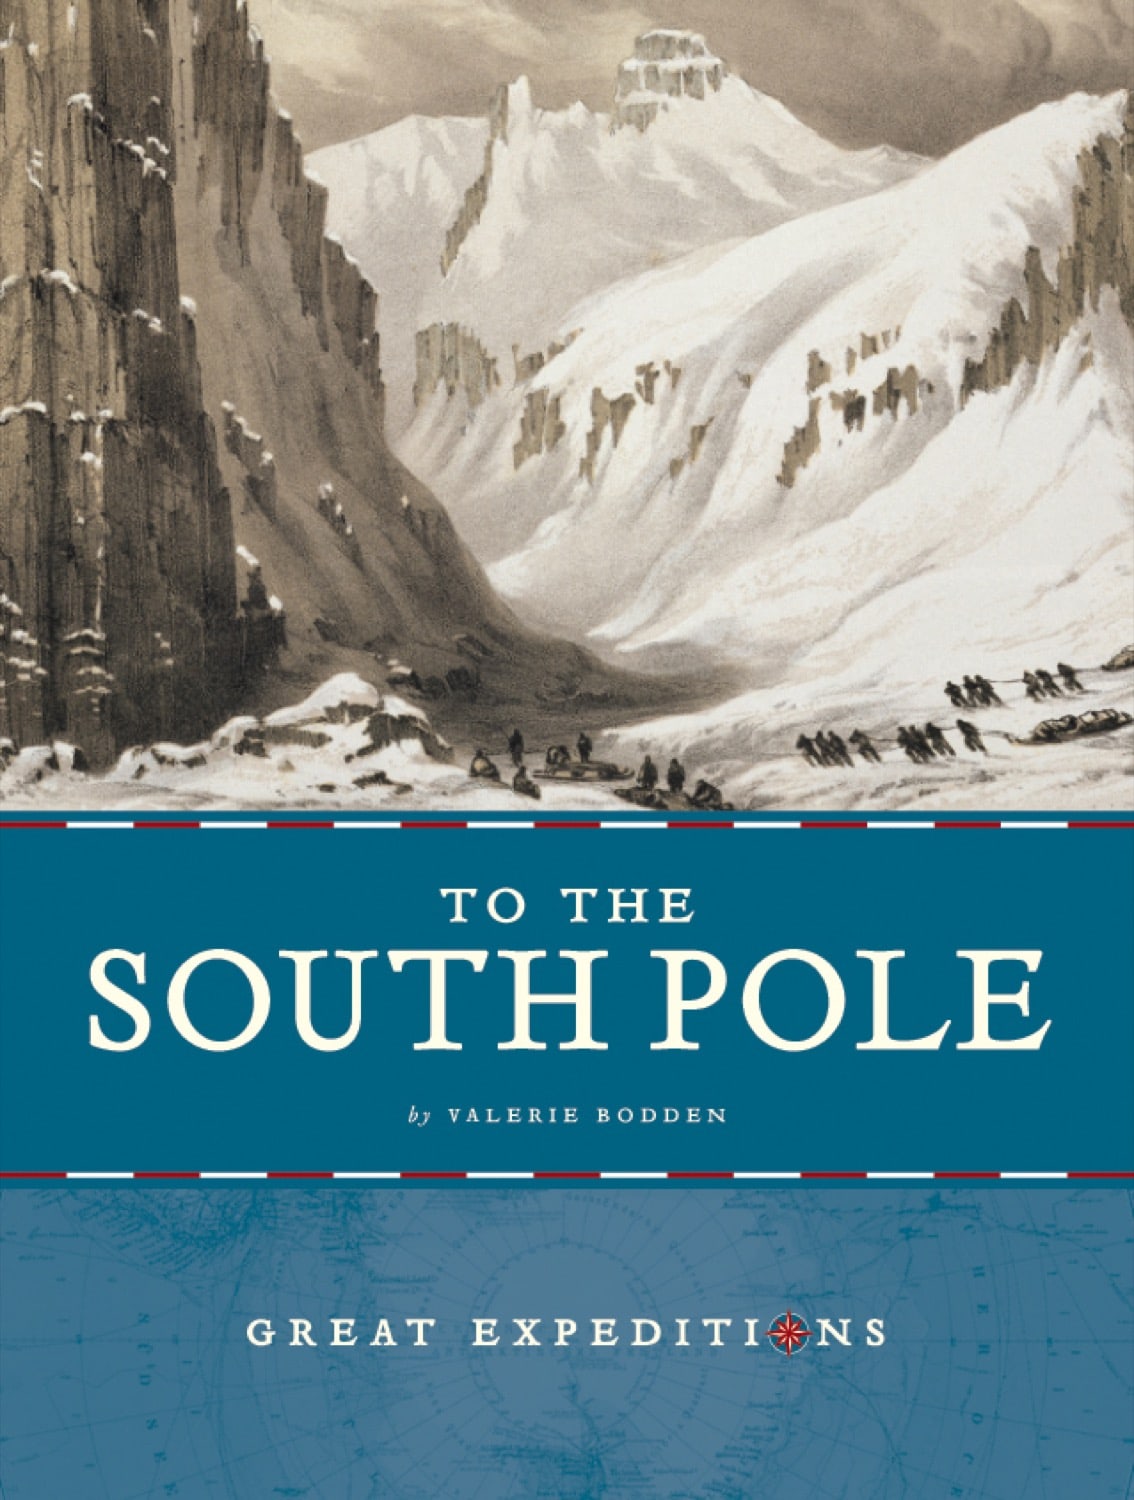 Great Expeditions: To the South Pole